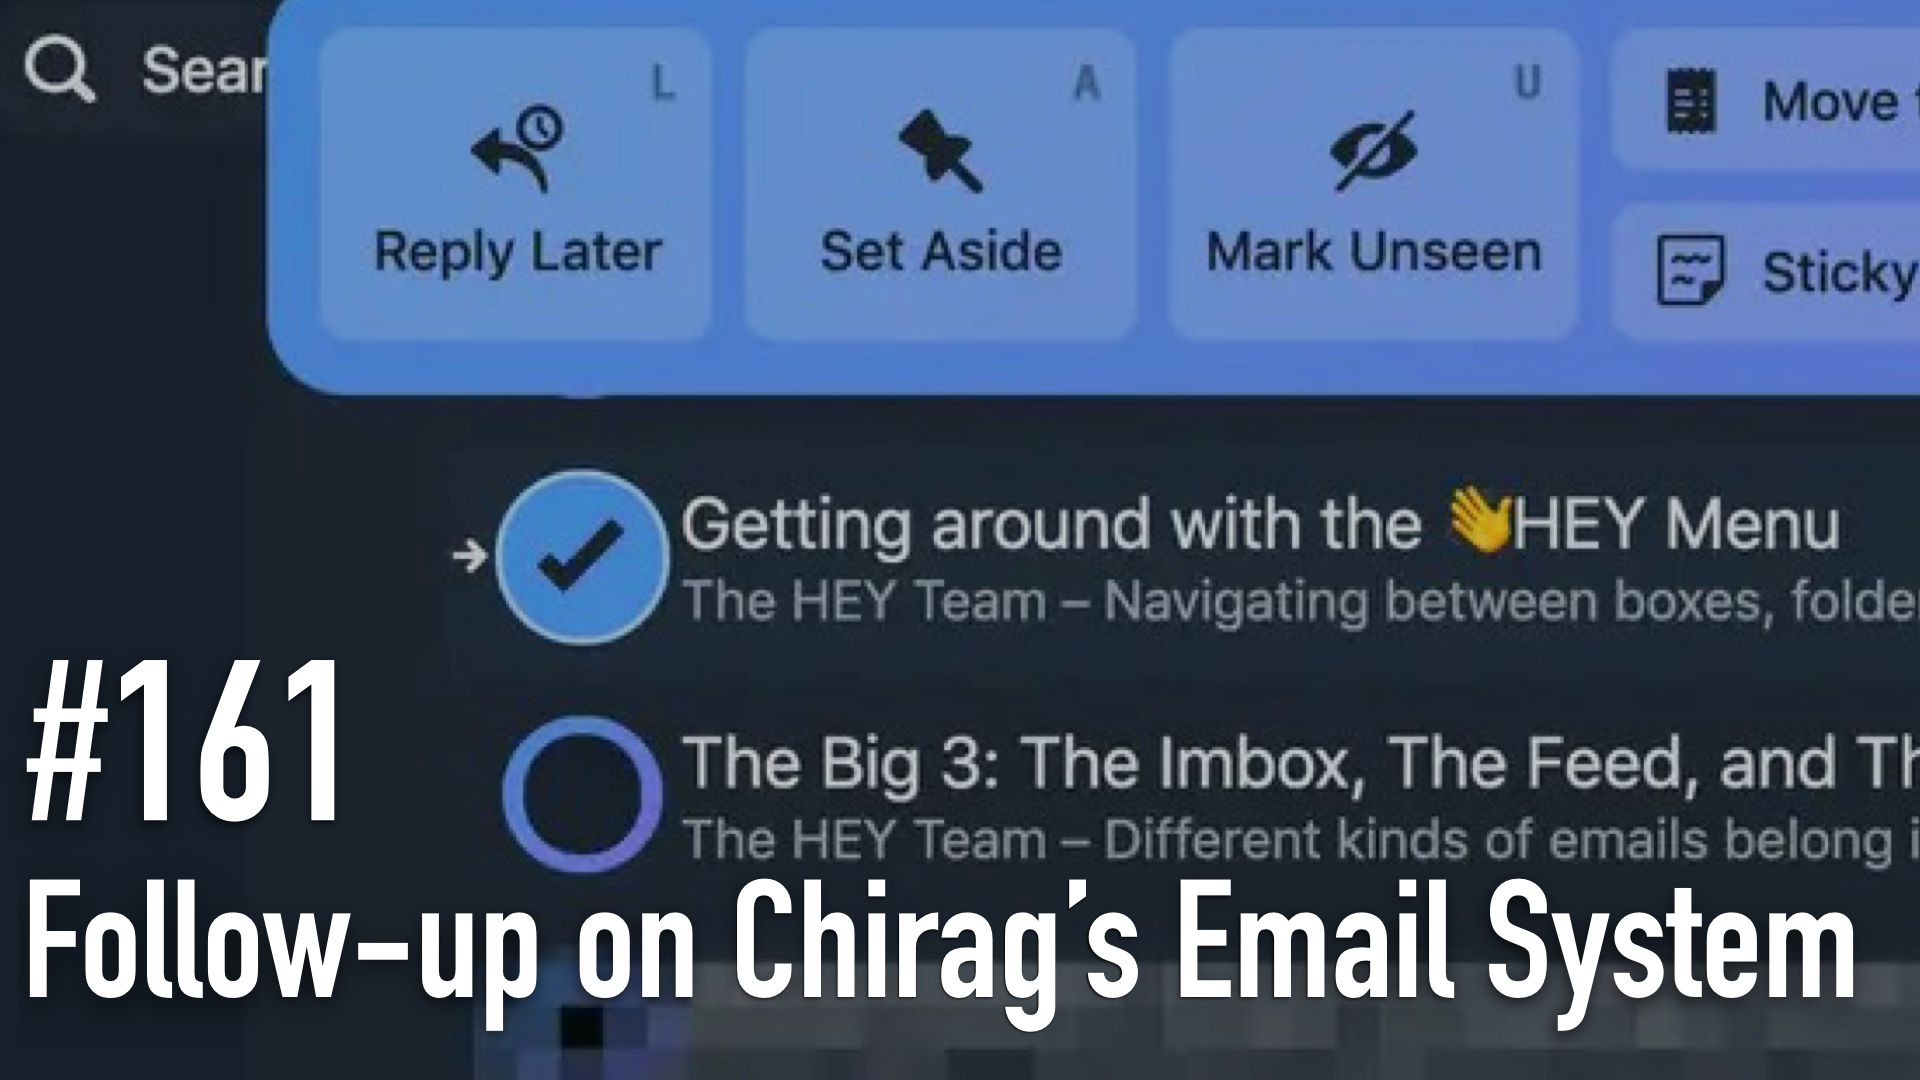 #161: Following up on Chirag’s New Email System